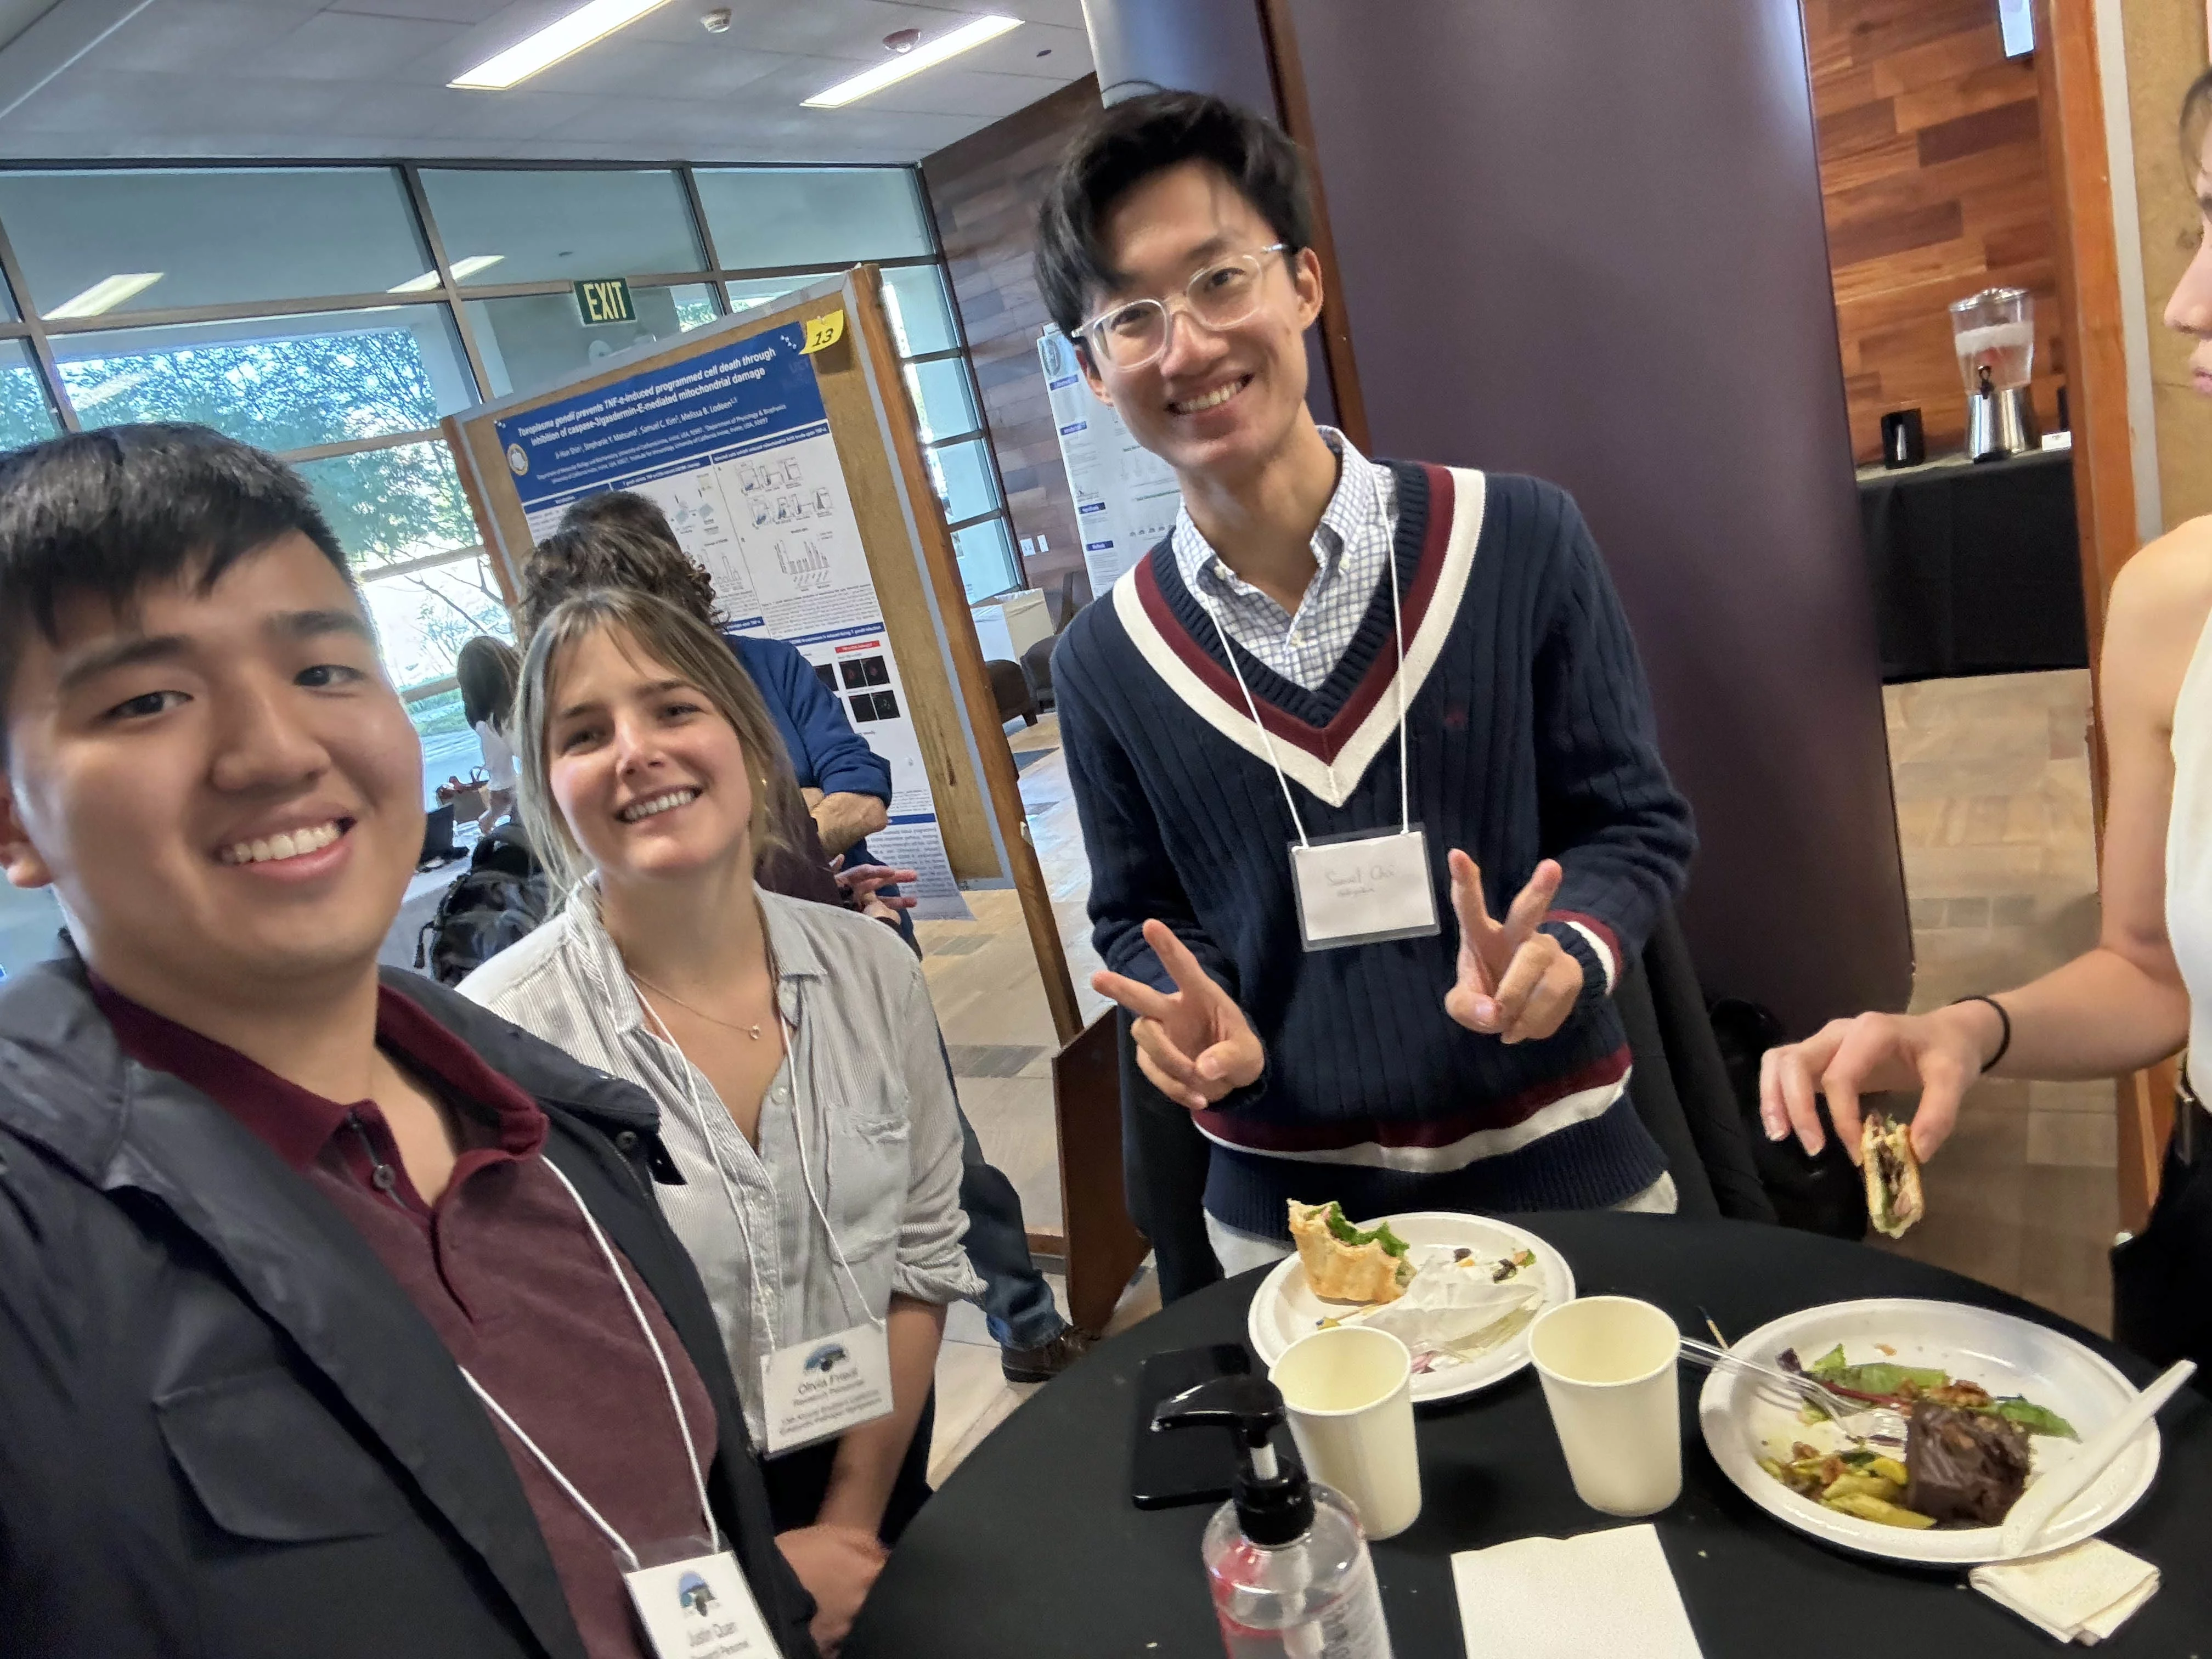 3 students taking a selfie at a conference while also snacking on food